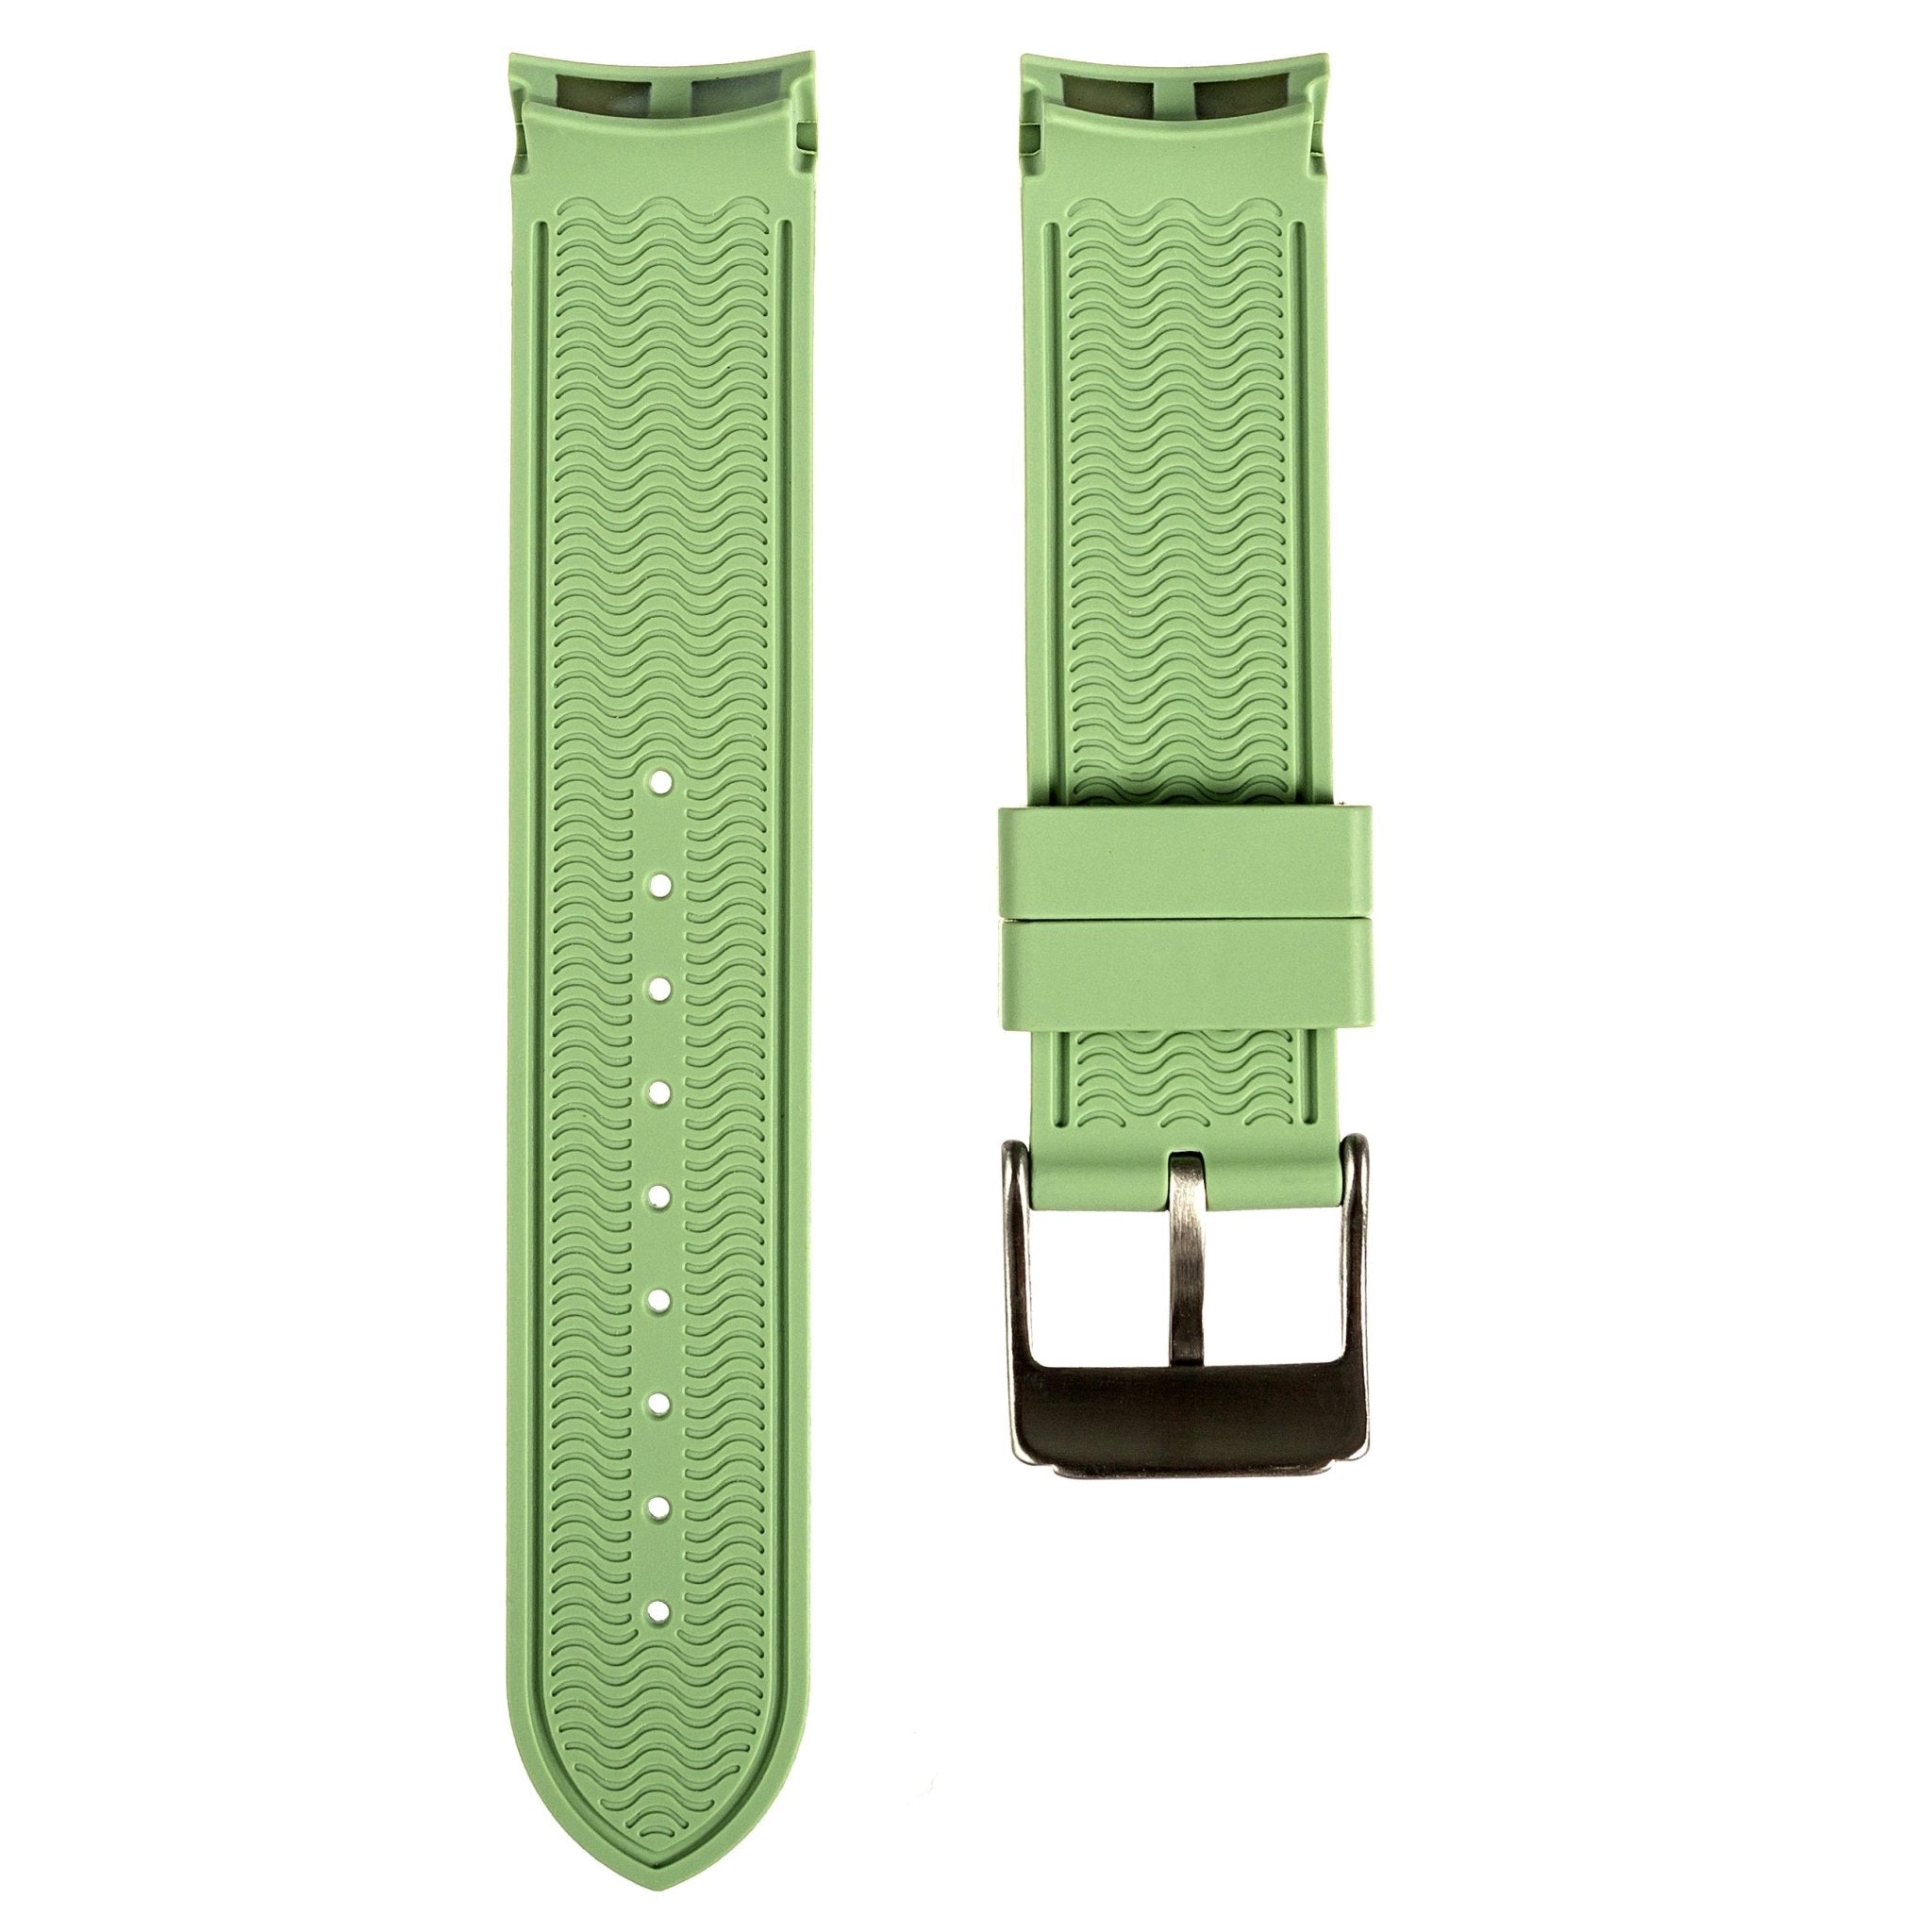 Paramount Curved End Premium Silicone Strap - Compatible with Omega Moonwatch - Light Green (2404) -StrapSeeker